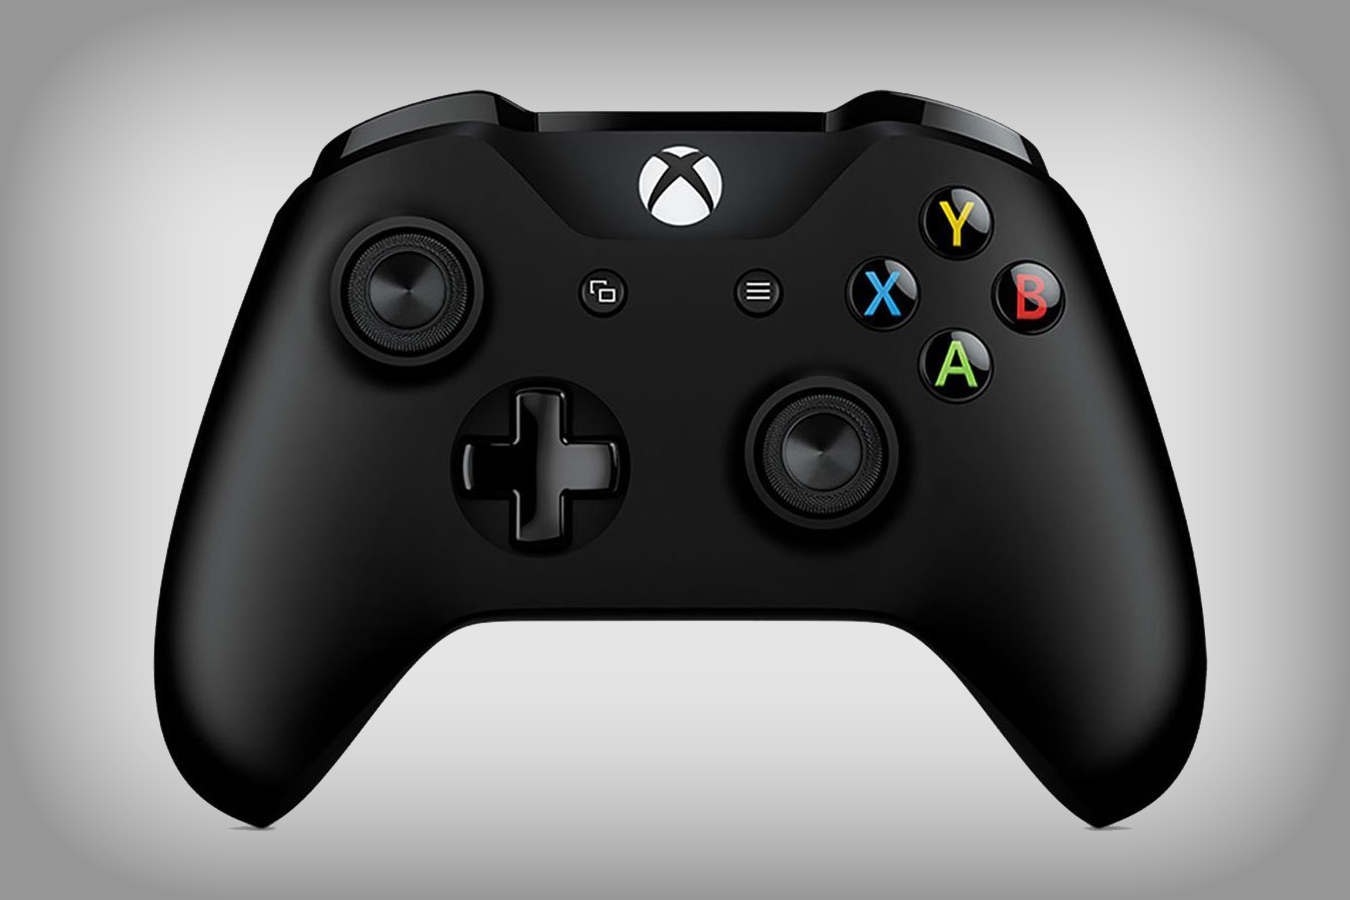 How to connect an Xbox One controller to your PC